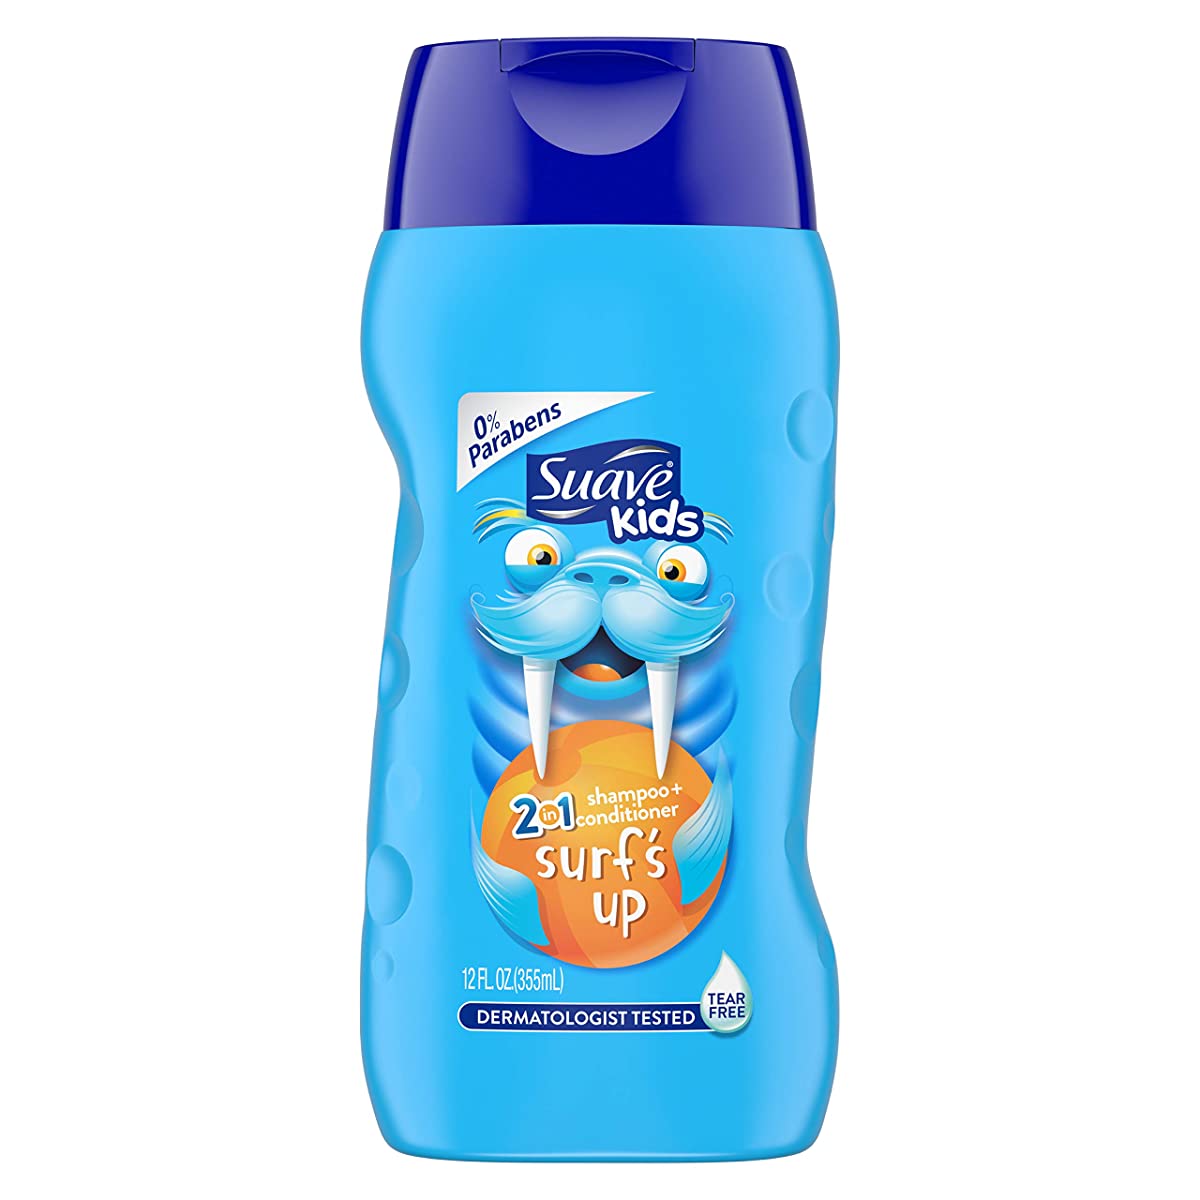 Suave Kids Surf's Up 2-in-1 Shampoo, Conditioner (355 ml)